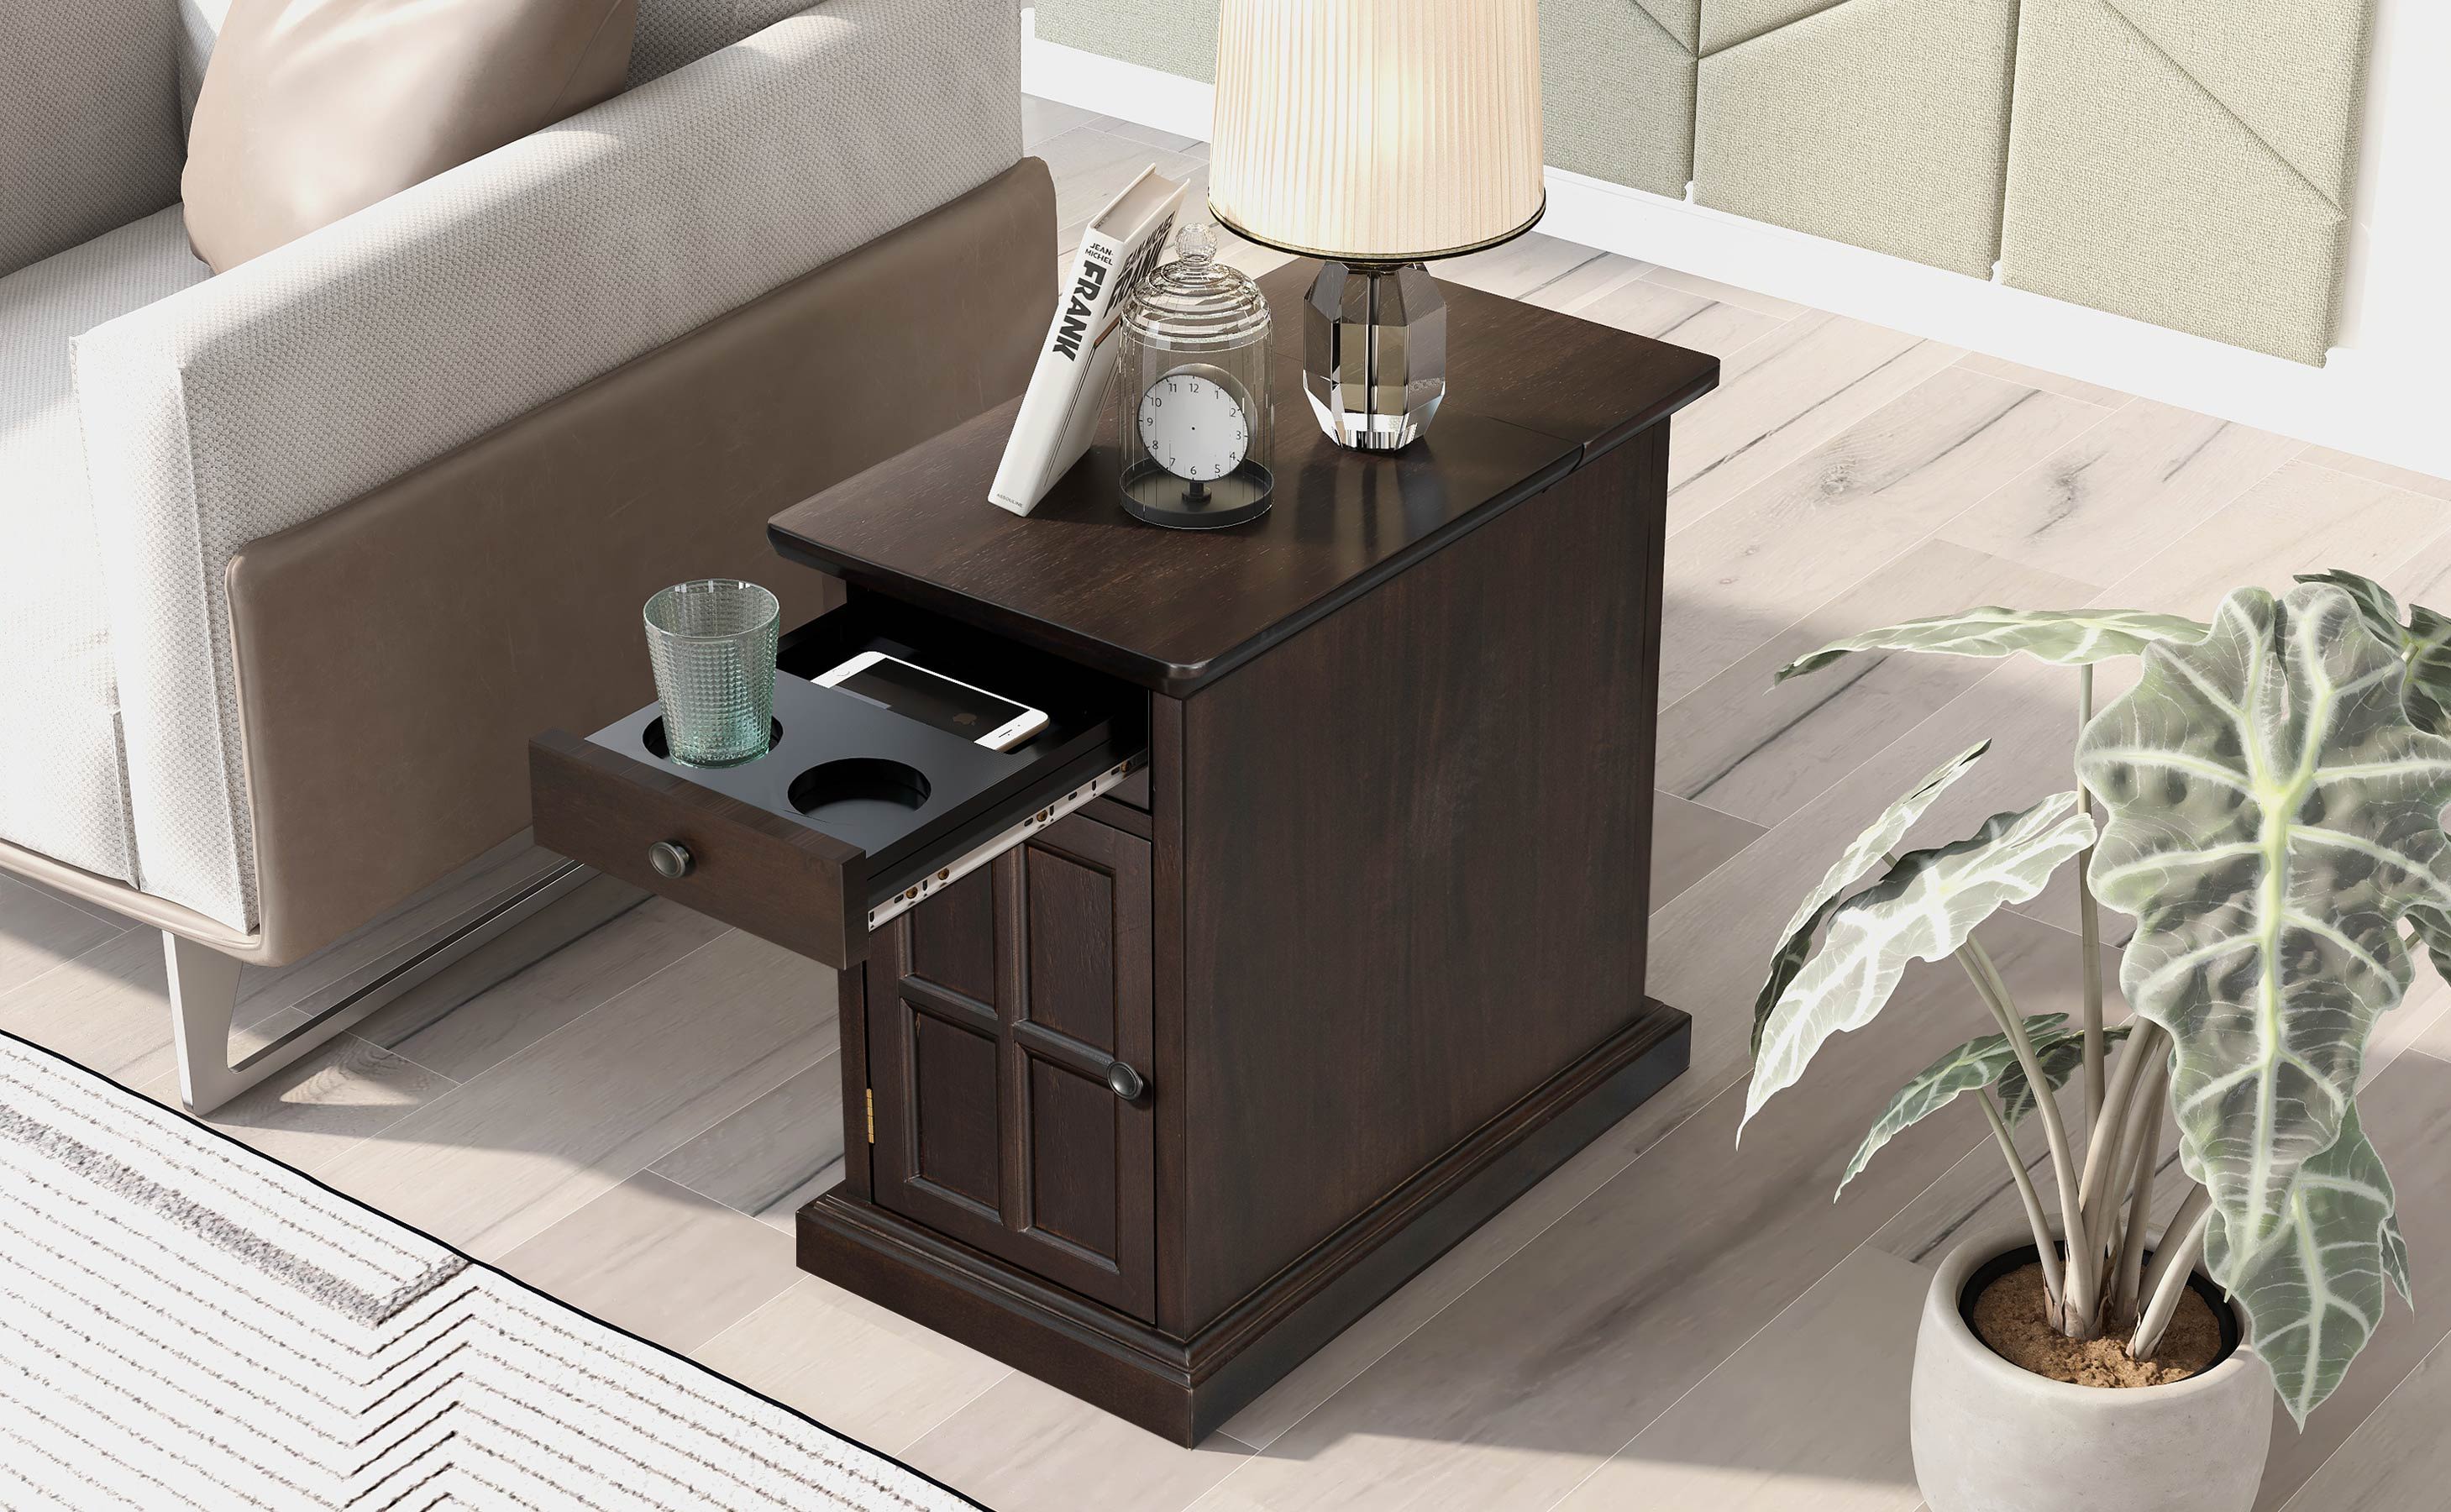 U-Can Classic Vintage Livingroom End Table Side Table With USB Ports And One Multifunctional Drawer With Cup Holders, Antique Espresso